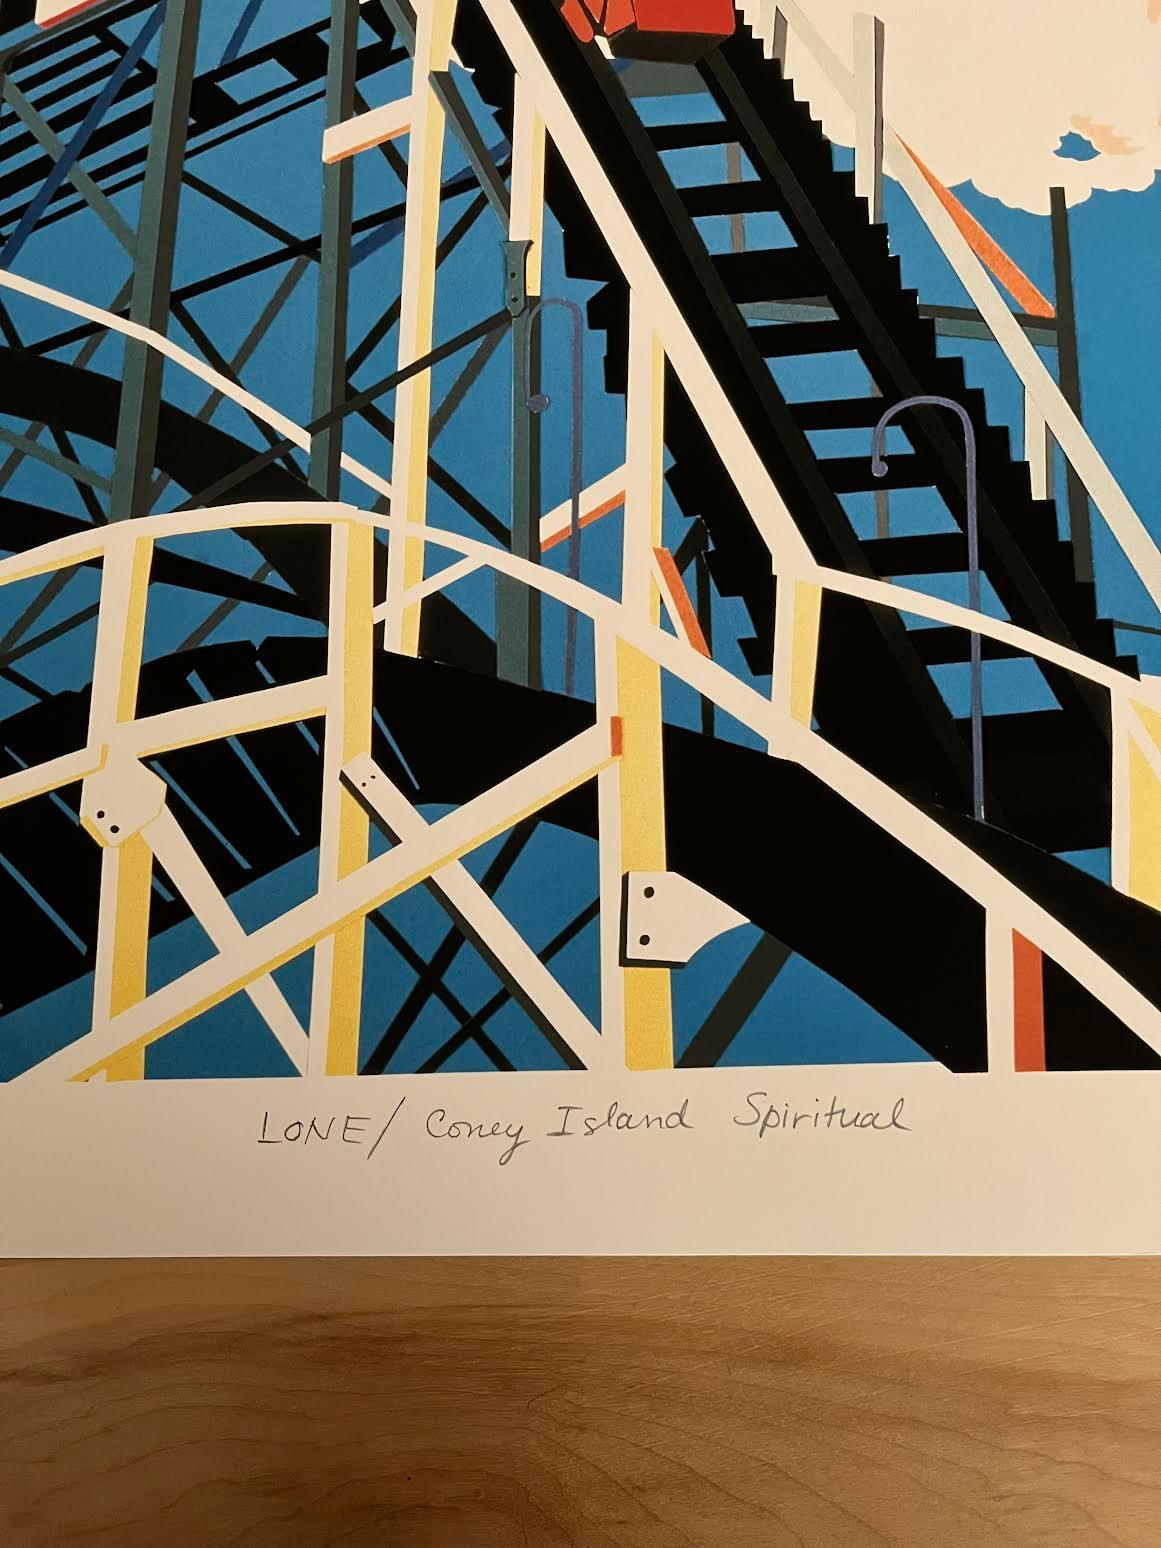 Portrait of the iconic Coney Island Cyclone Roller Coaster. Limited edition 200, archival pigment print on Sateen white paper, signed & numbered. Image depicts the rush and pure exhilaration of the Cyclone. 
LONE/ Coney Island Spiritual is from my